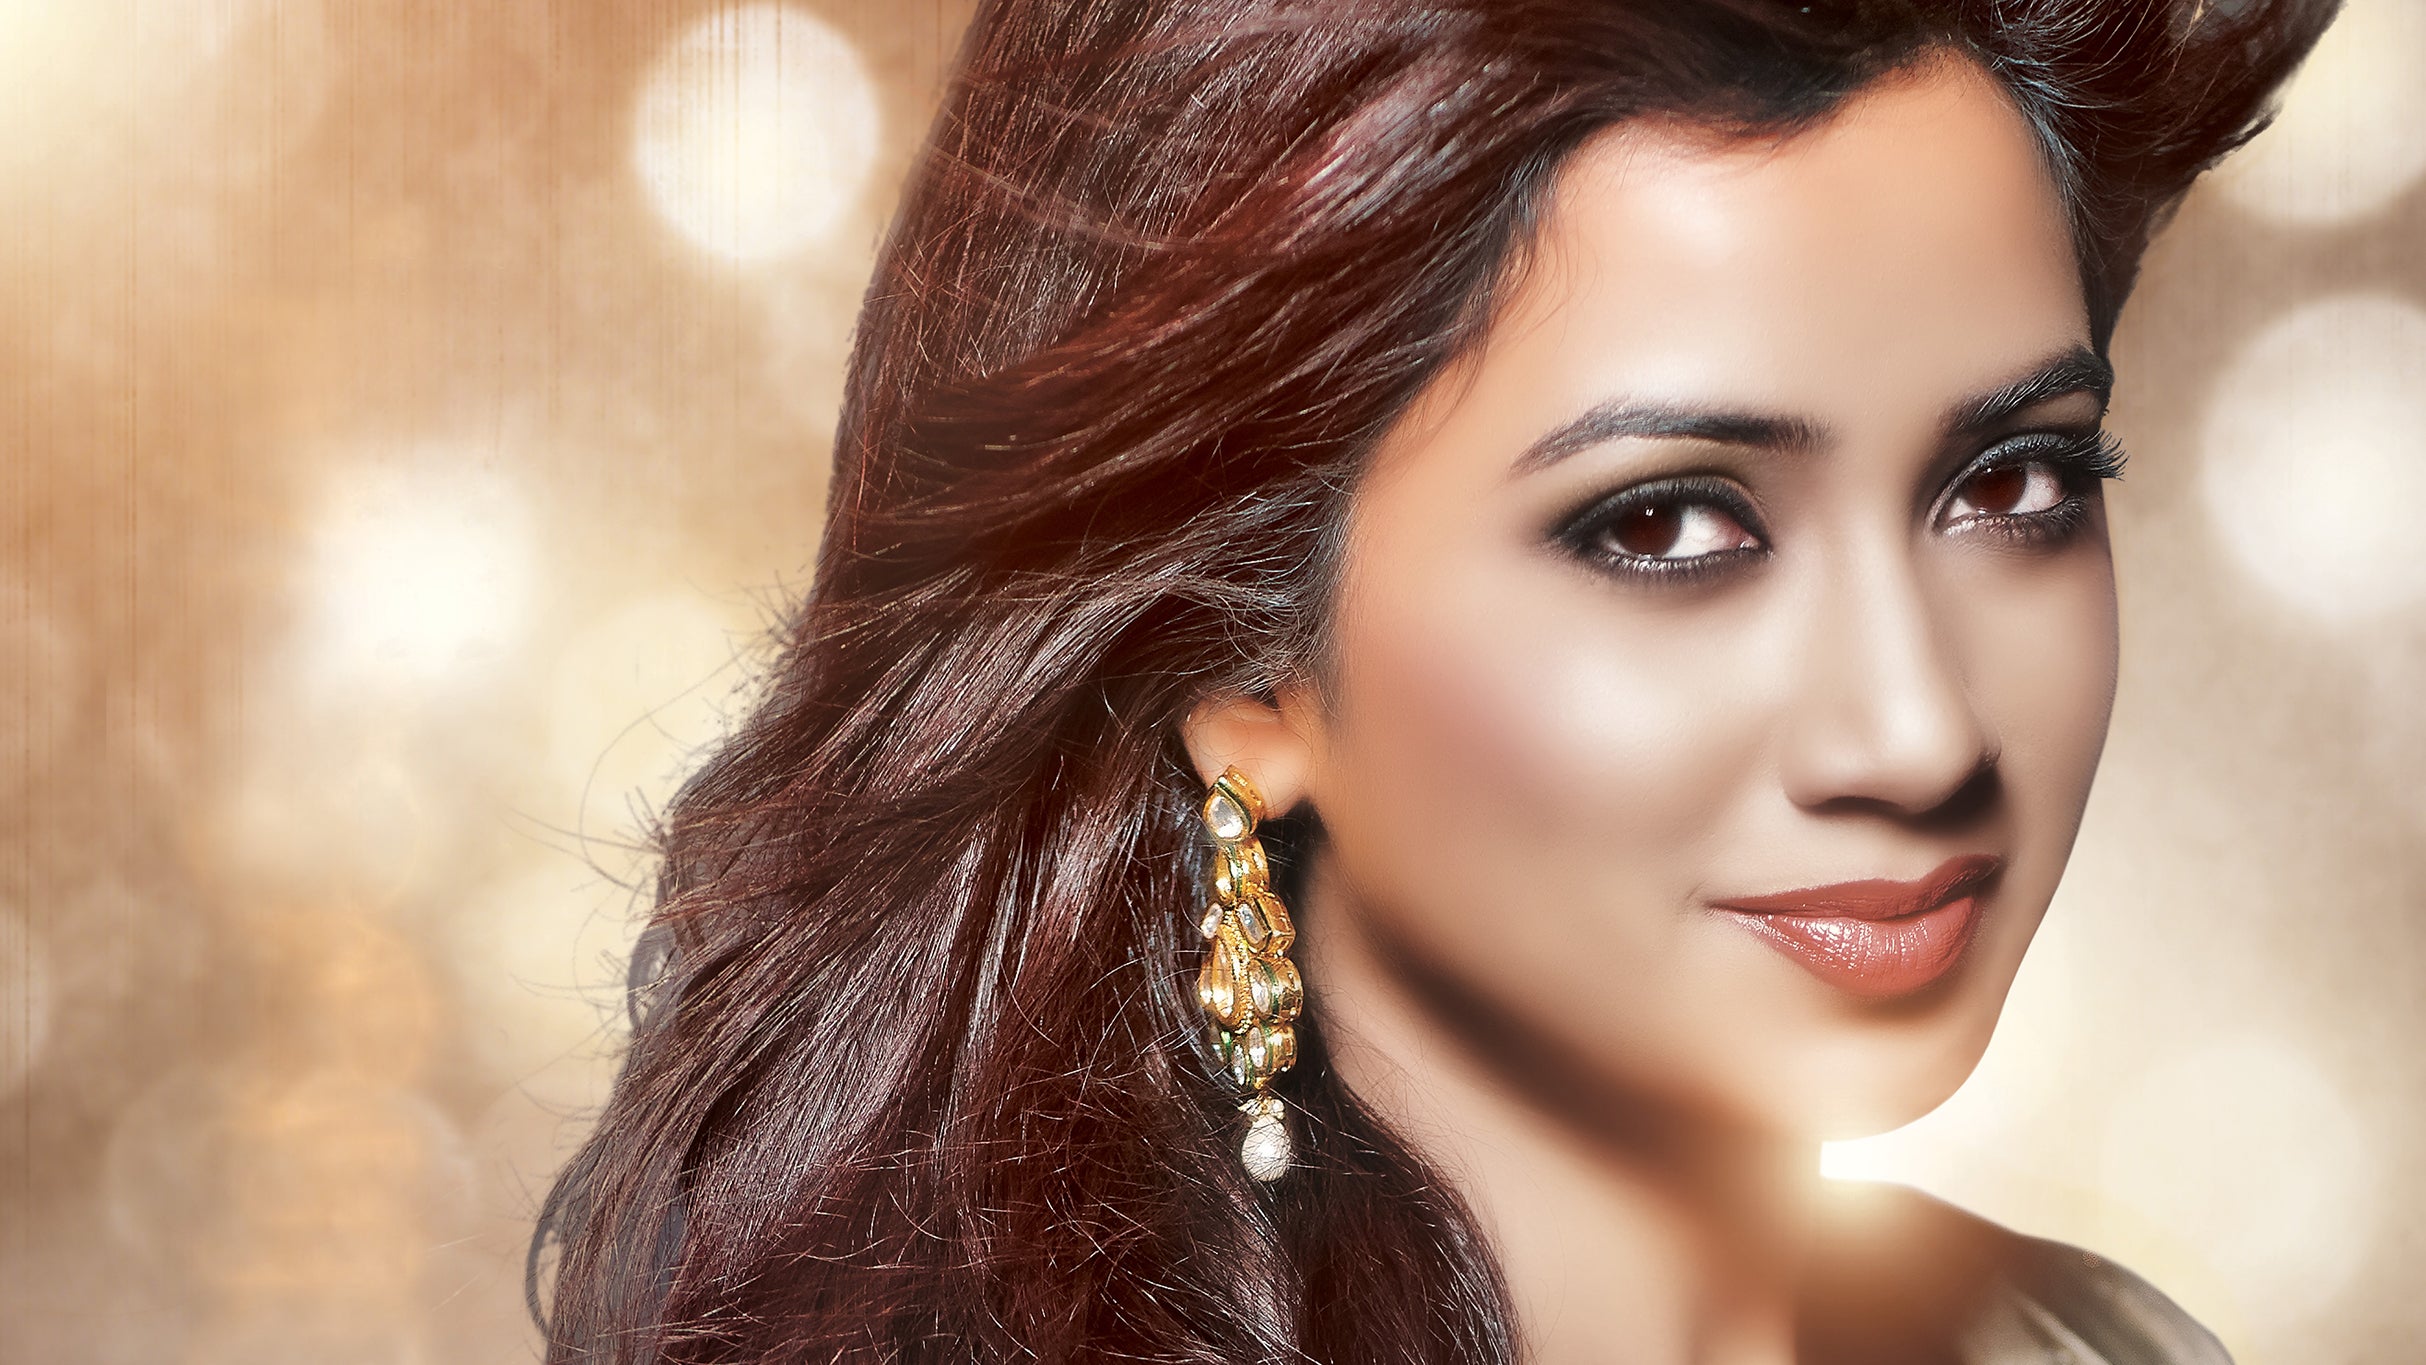 All Hearts Tour: Shreya Ghoshal LIVE free presale listing for show tickets in Oakland, CA (Oakland Arena)